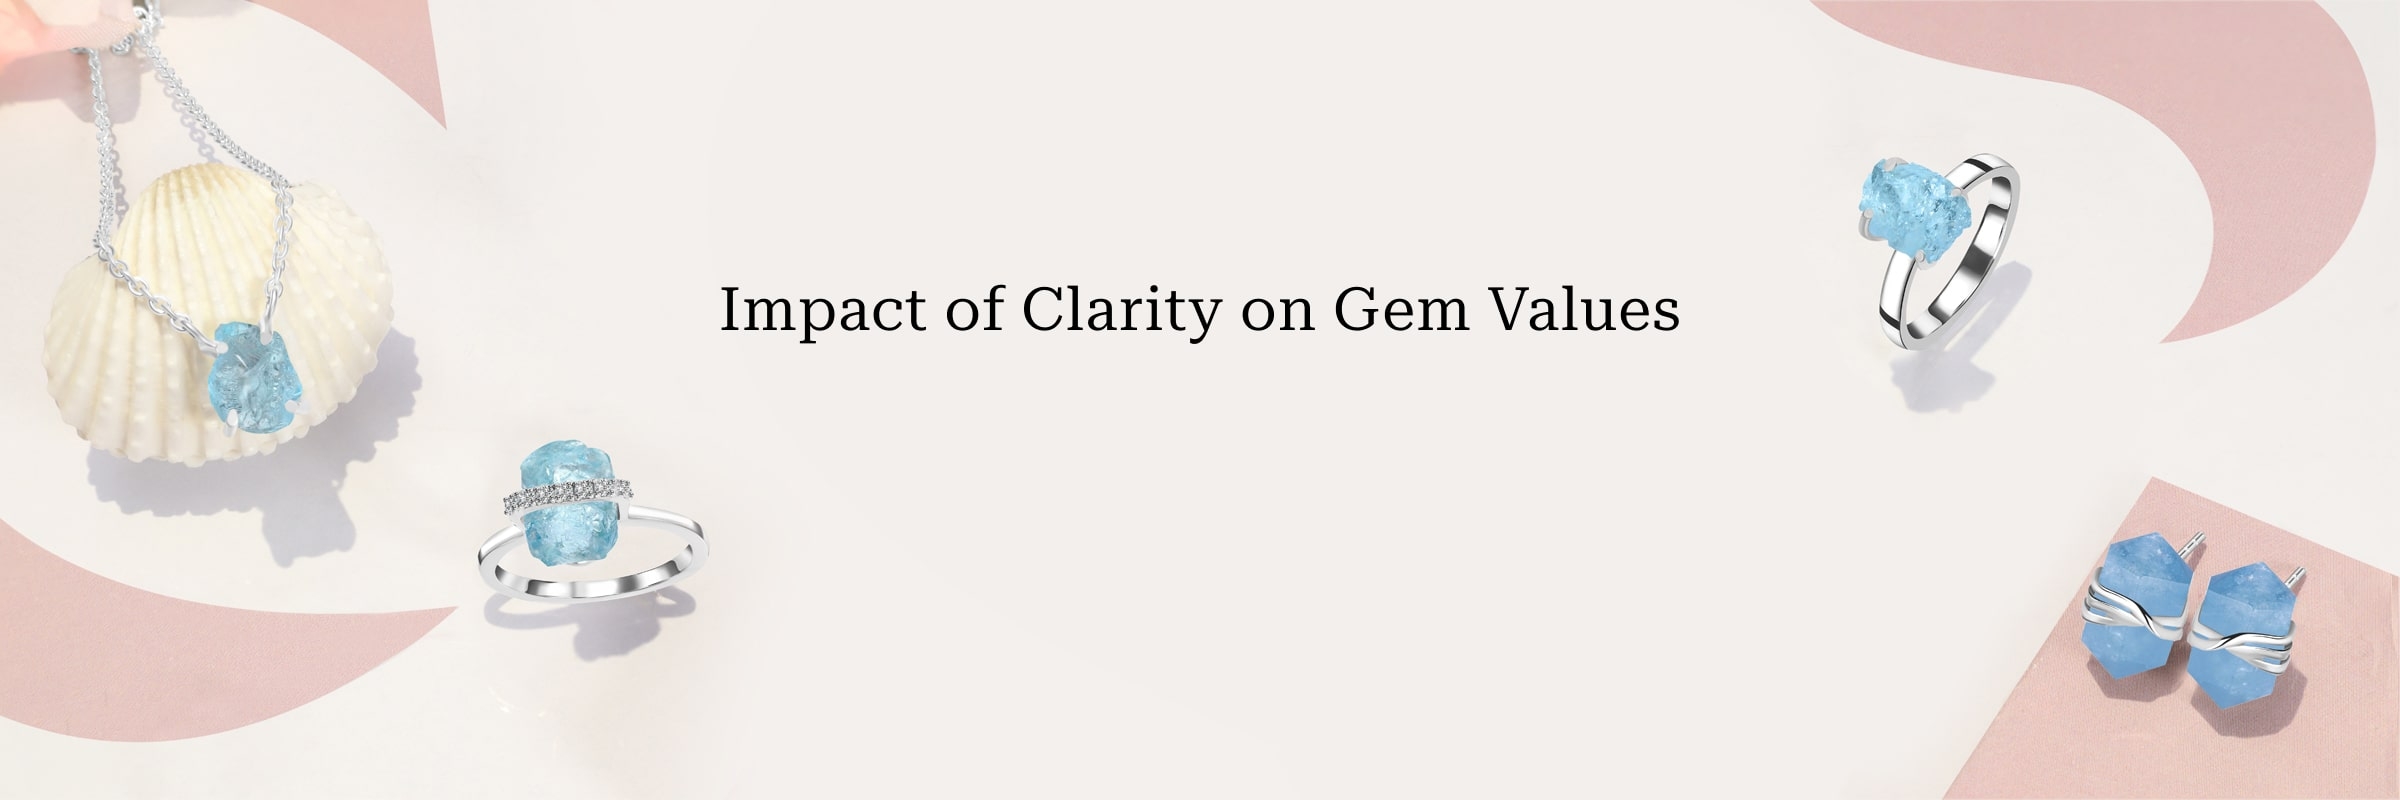 Clarity: How Clarity Affects Gem Pricing